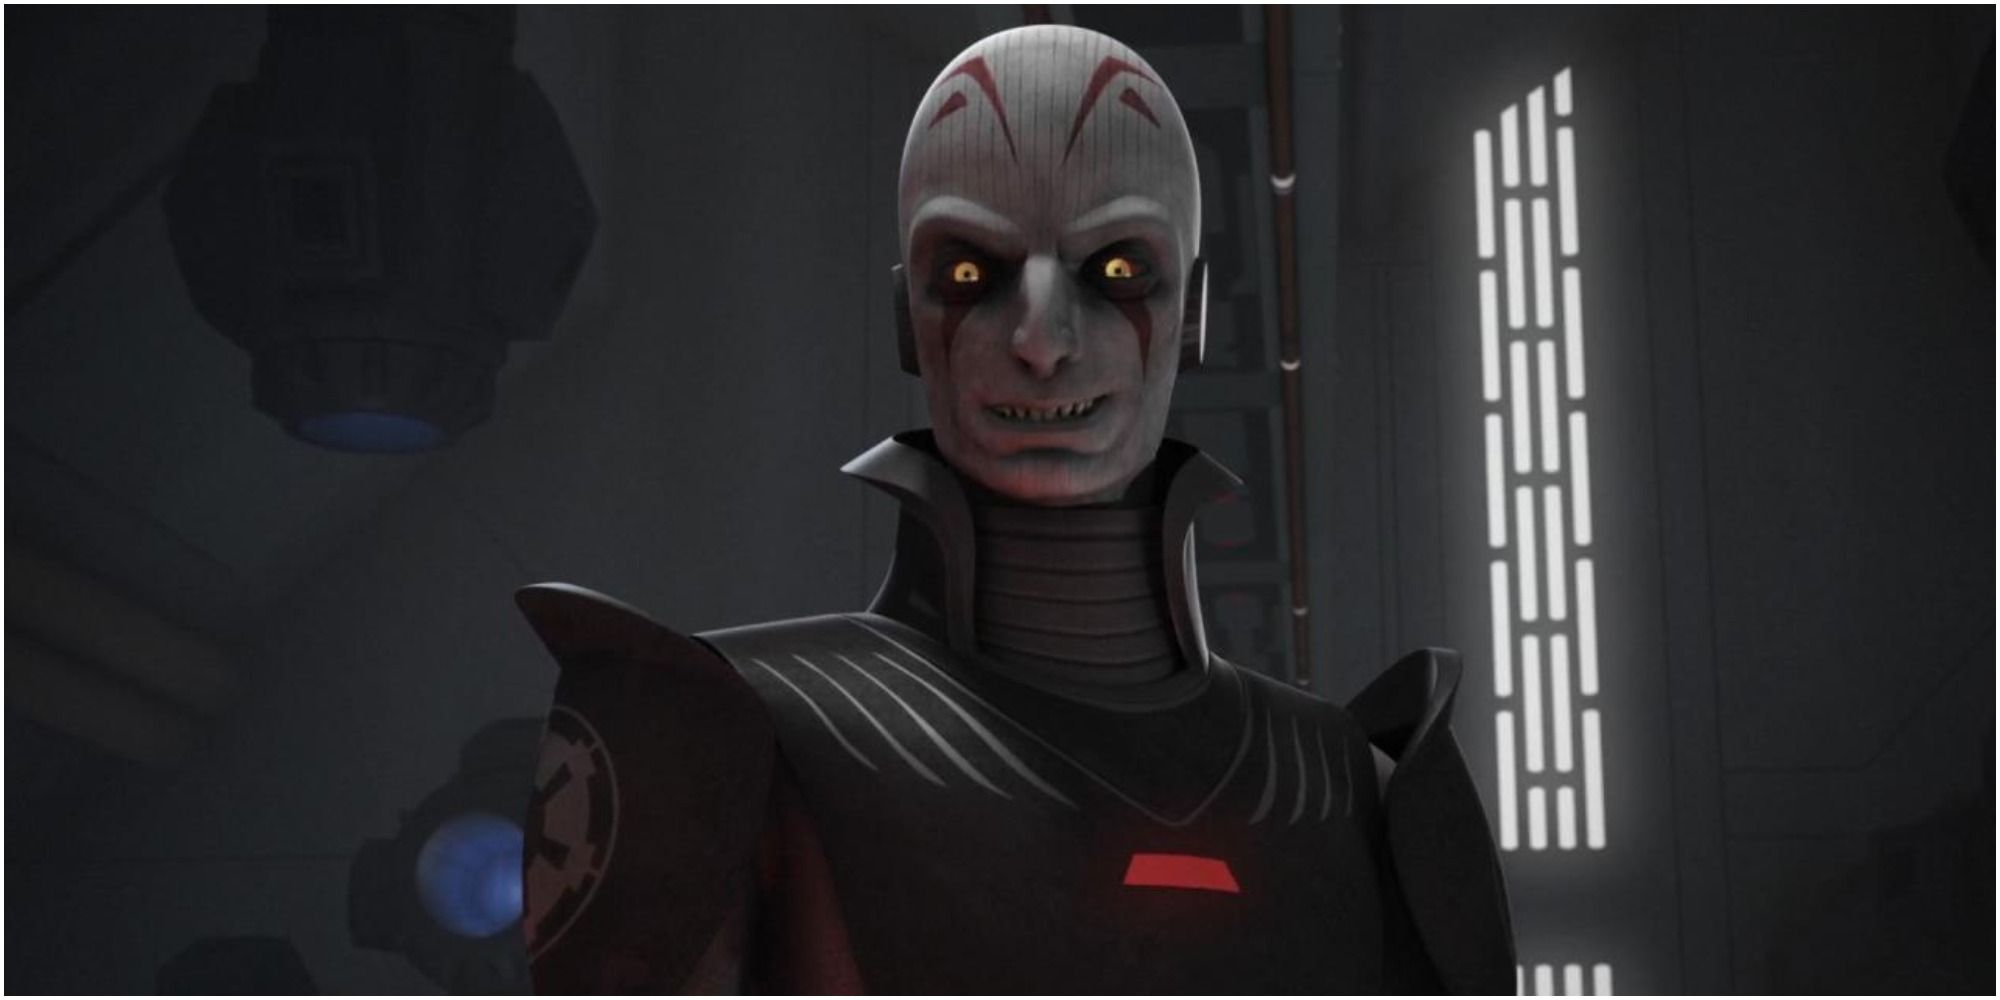 The Grand Inquisitor smiling